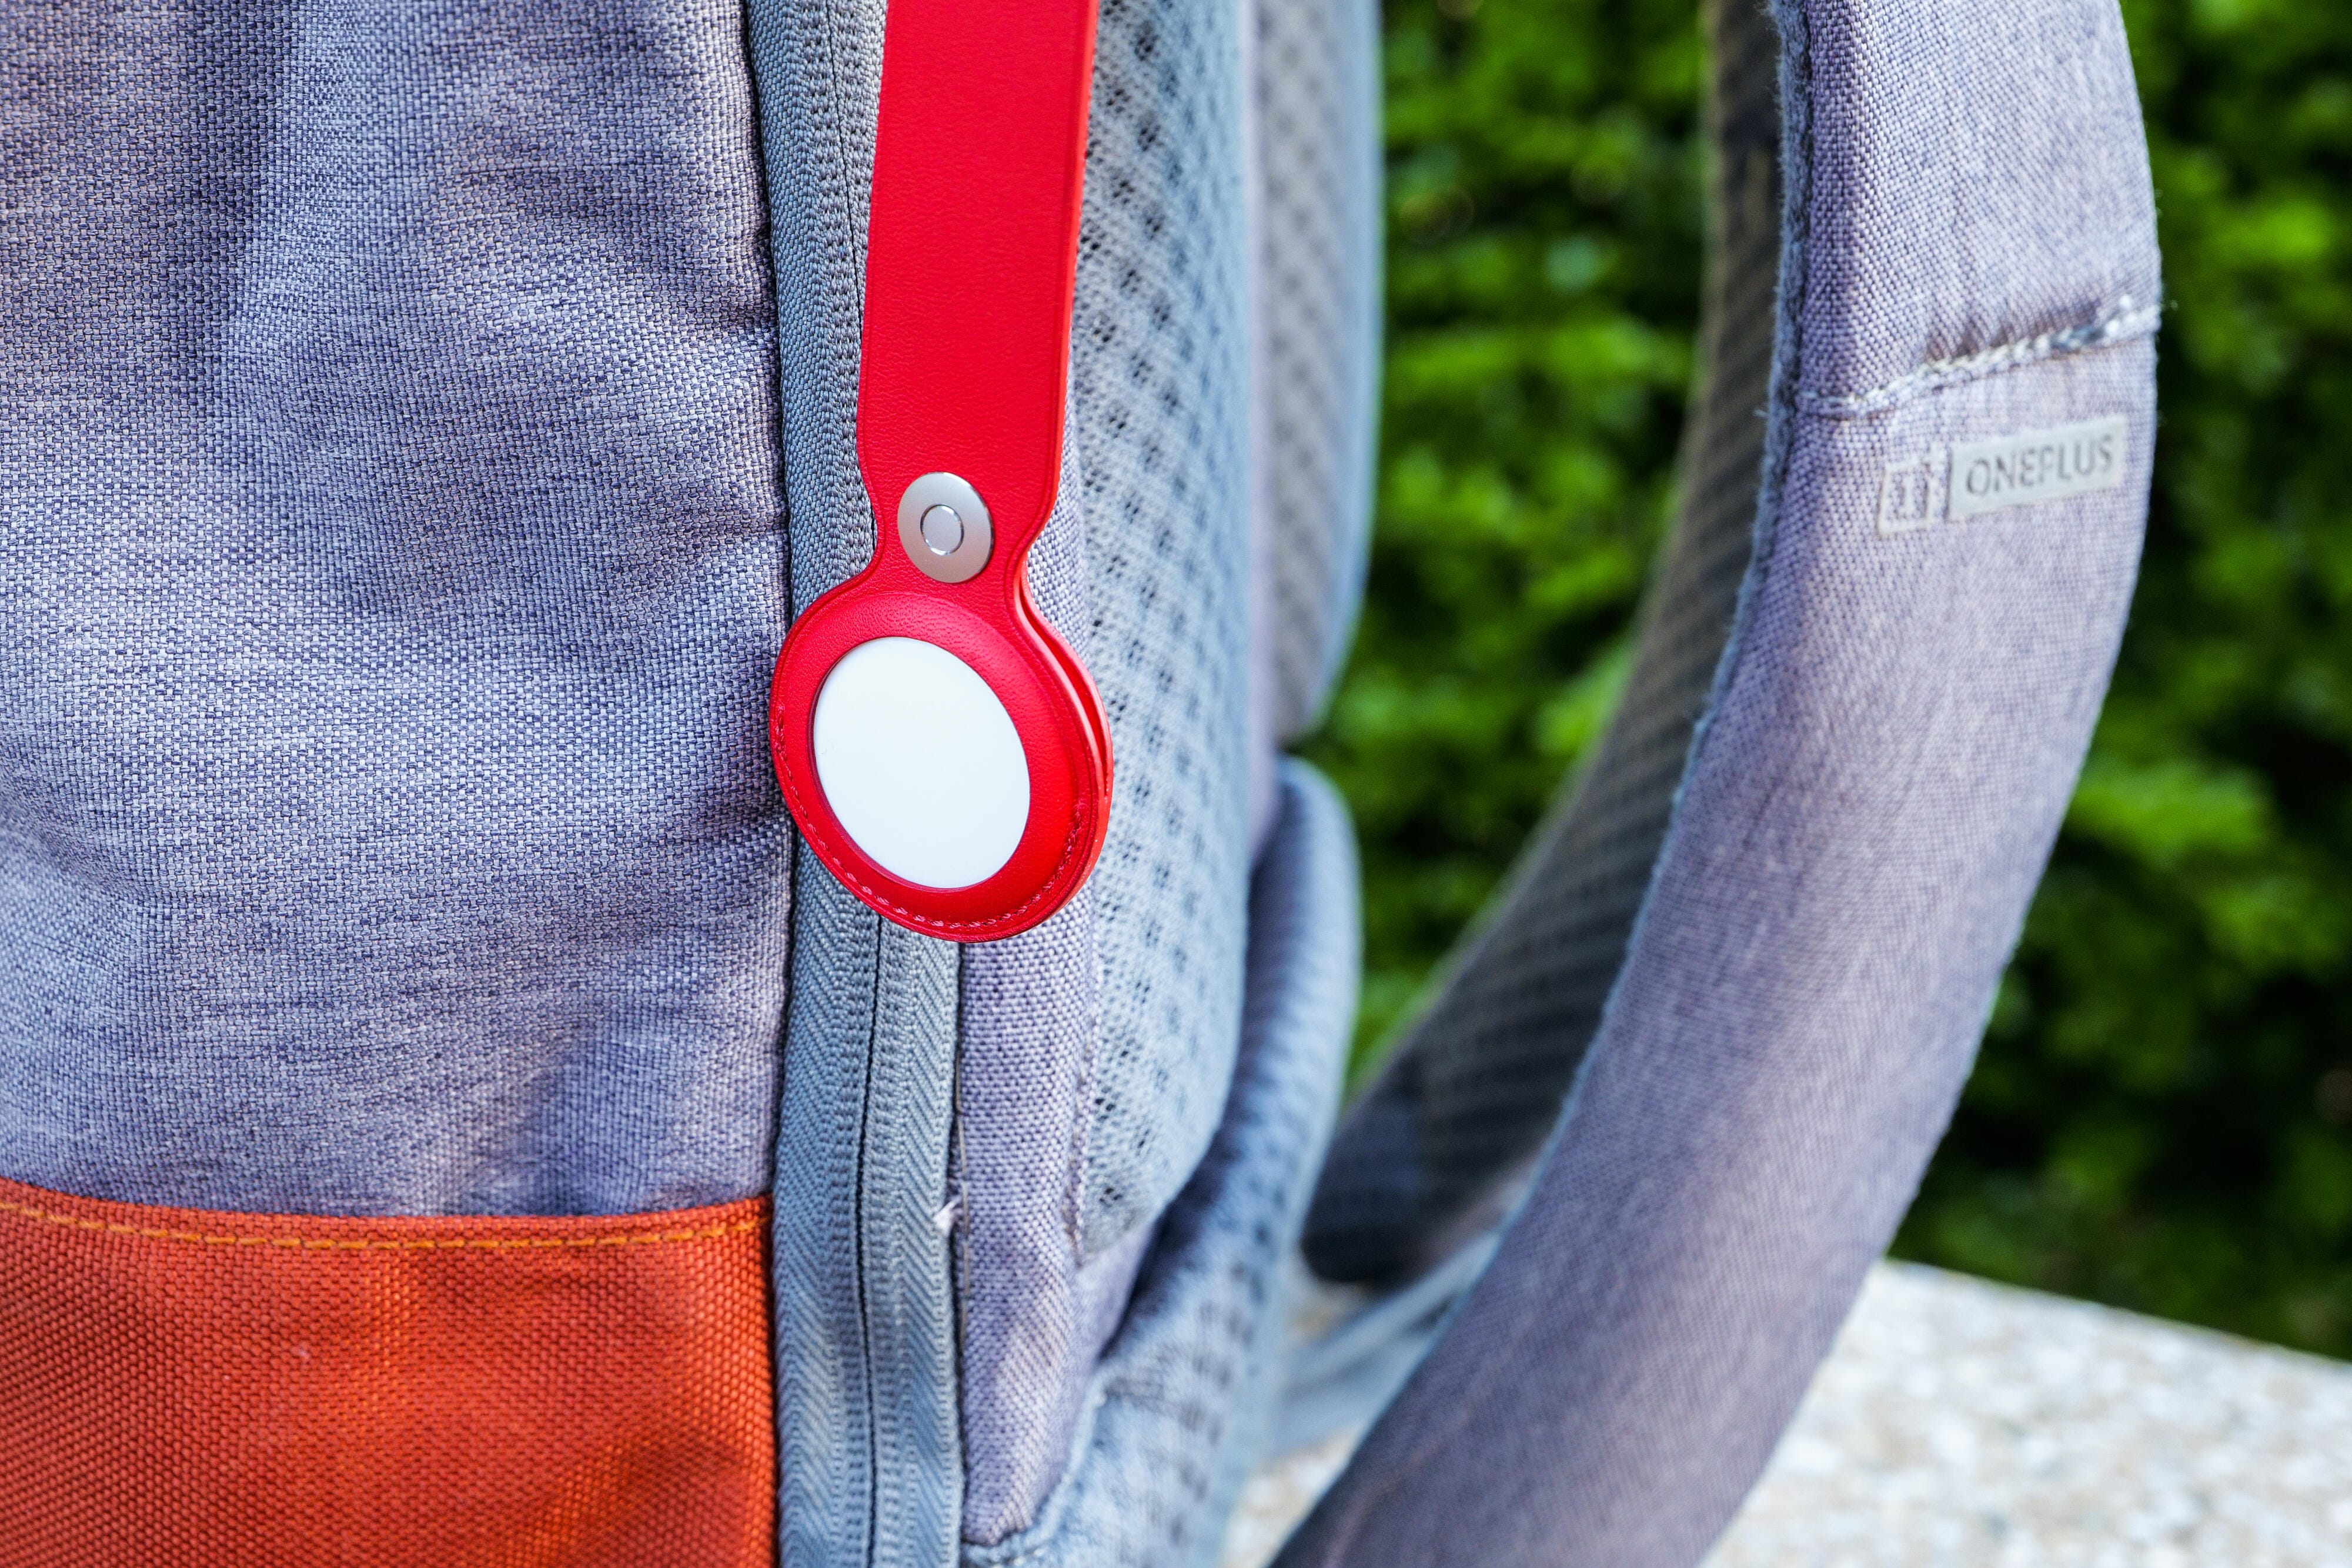 7 AirTag tricks for Apple’s Tile-like tracker: Find lost stuff, return found items and more